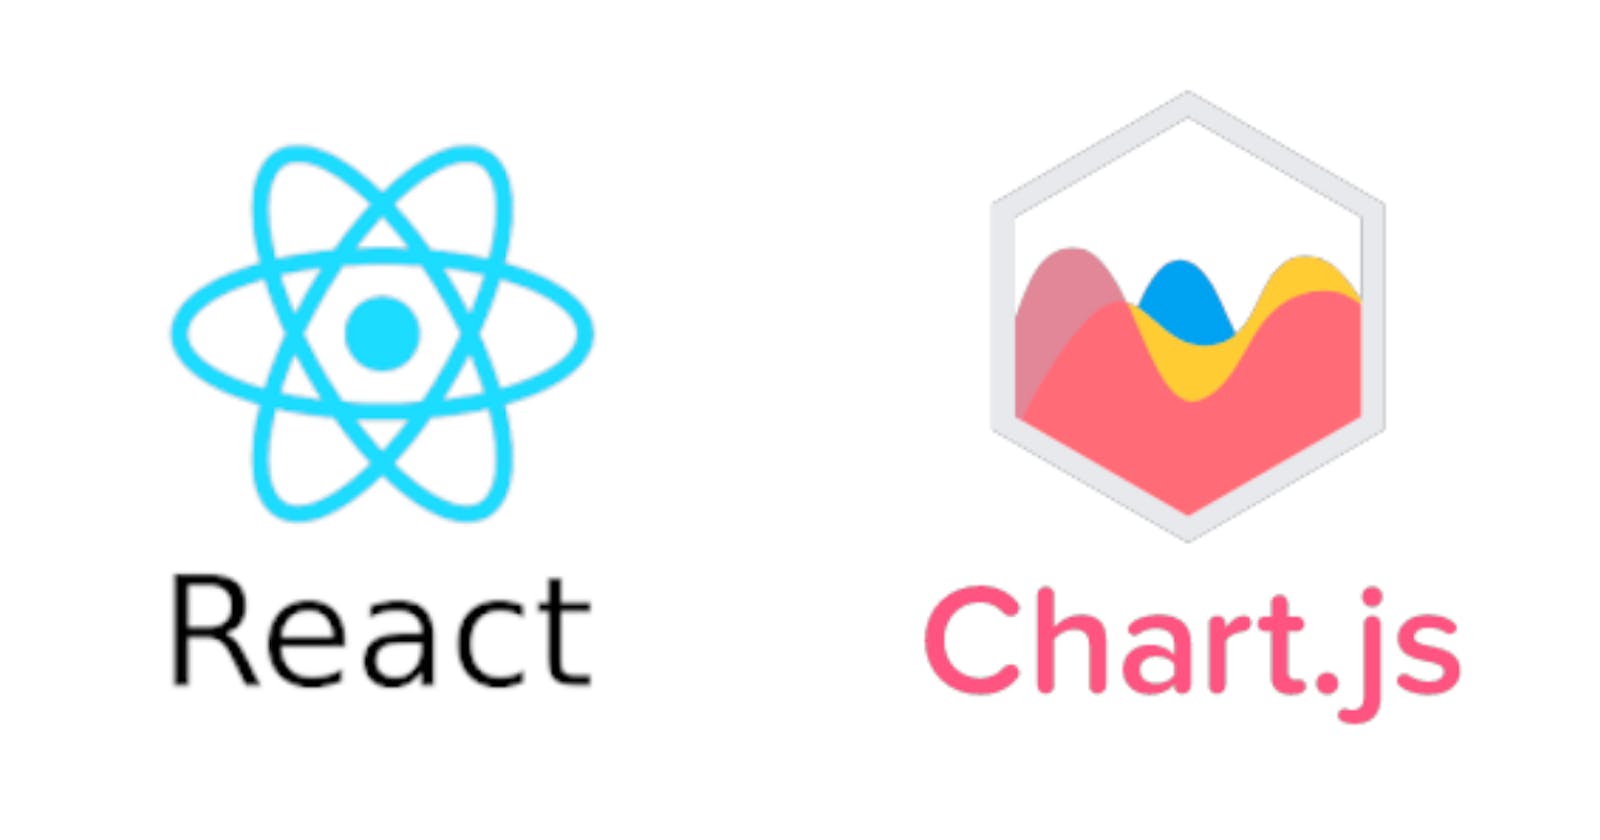 How to use Chart.js in React